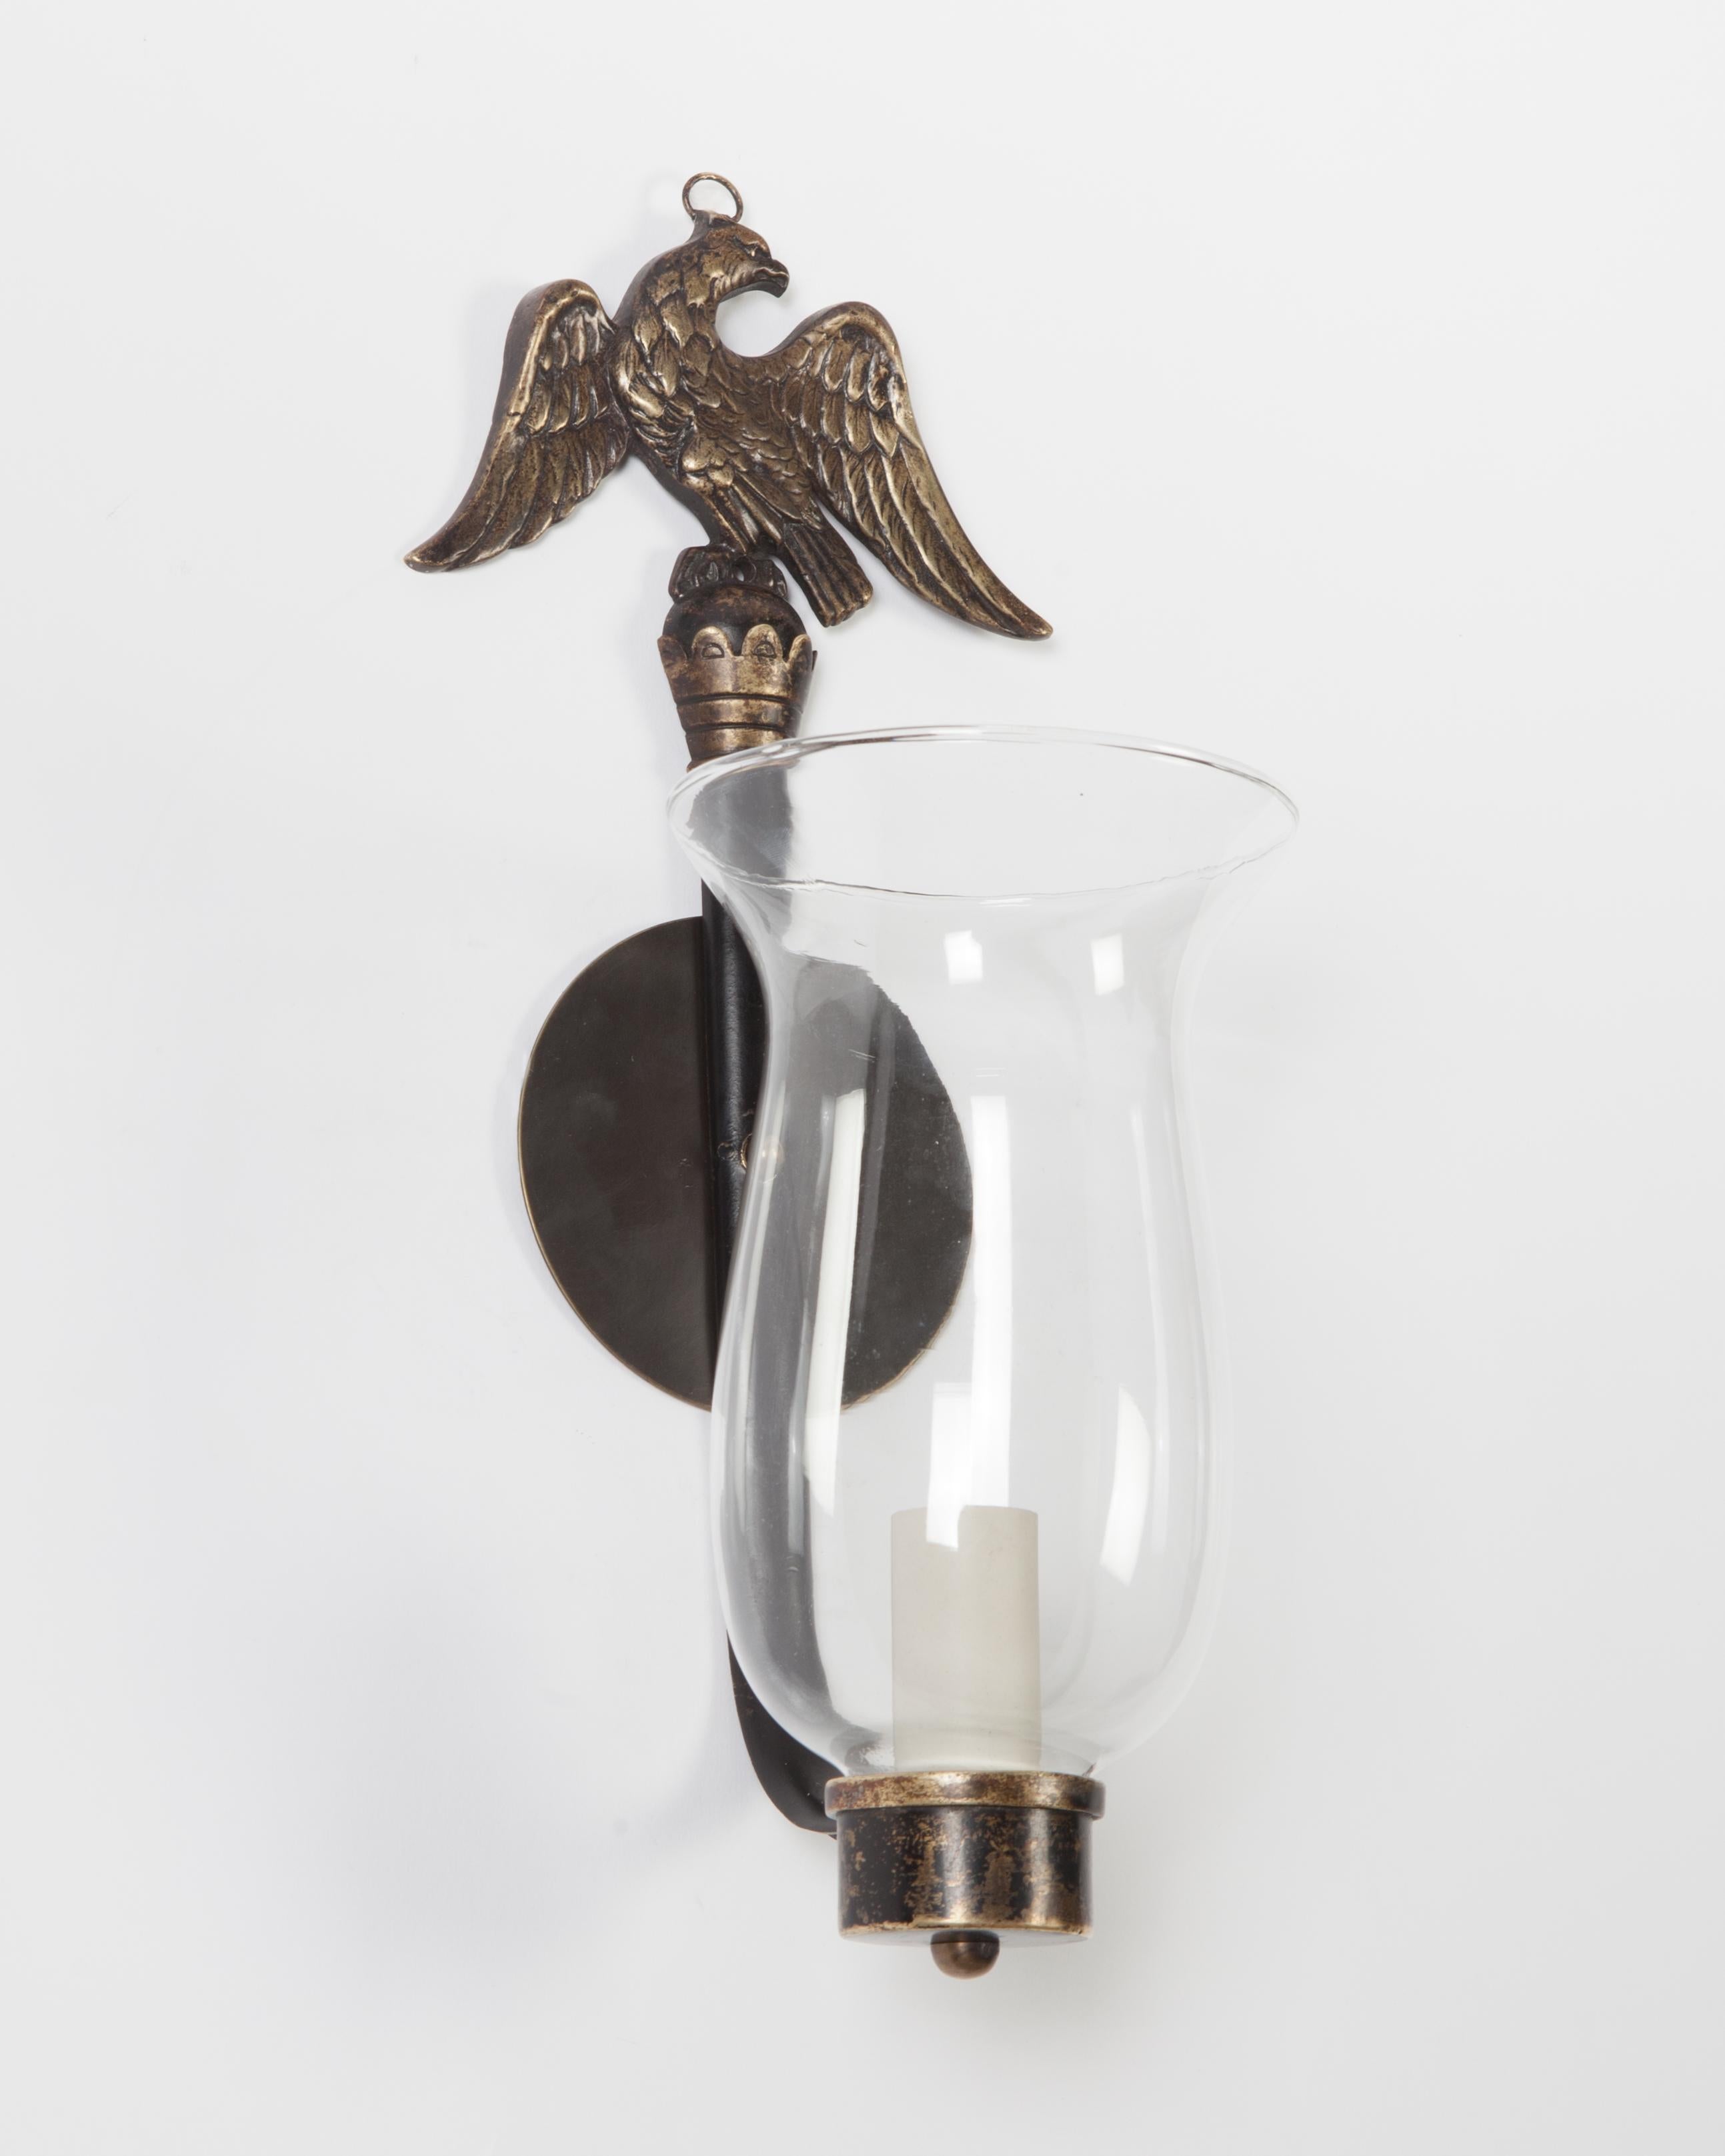 AIS2912
A pair of single light federal Revival period sconces with clear glass hurricane shades and slender backplates surmounted by eagles, circa 1920. Retaining their aged brass and worn black lacquer finish. There may be some nicks or